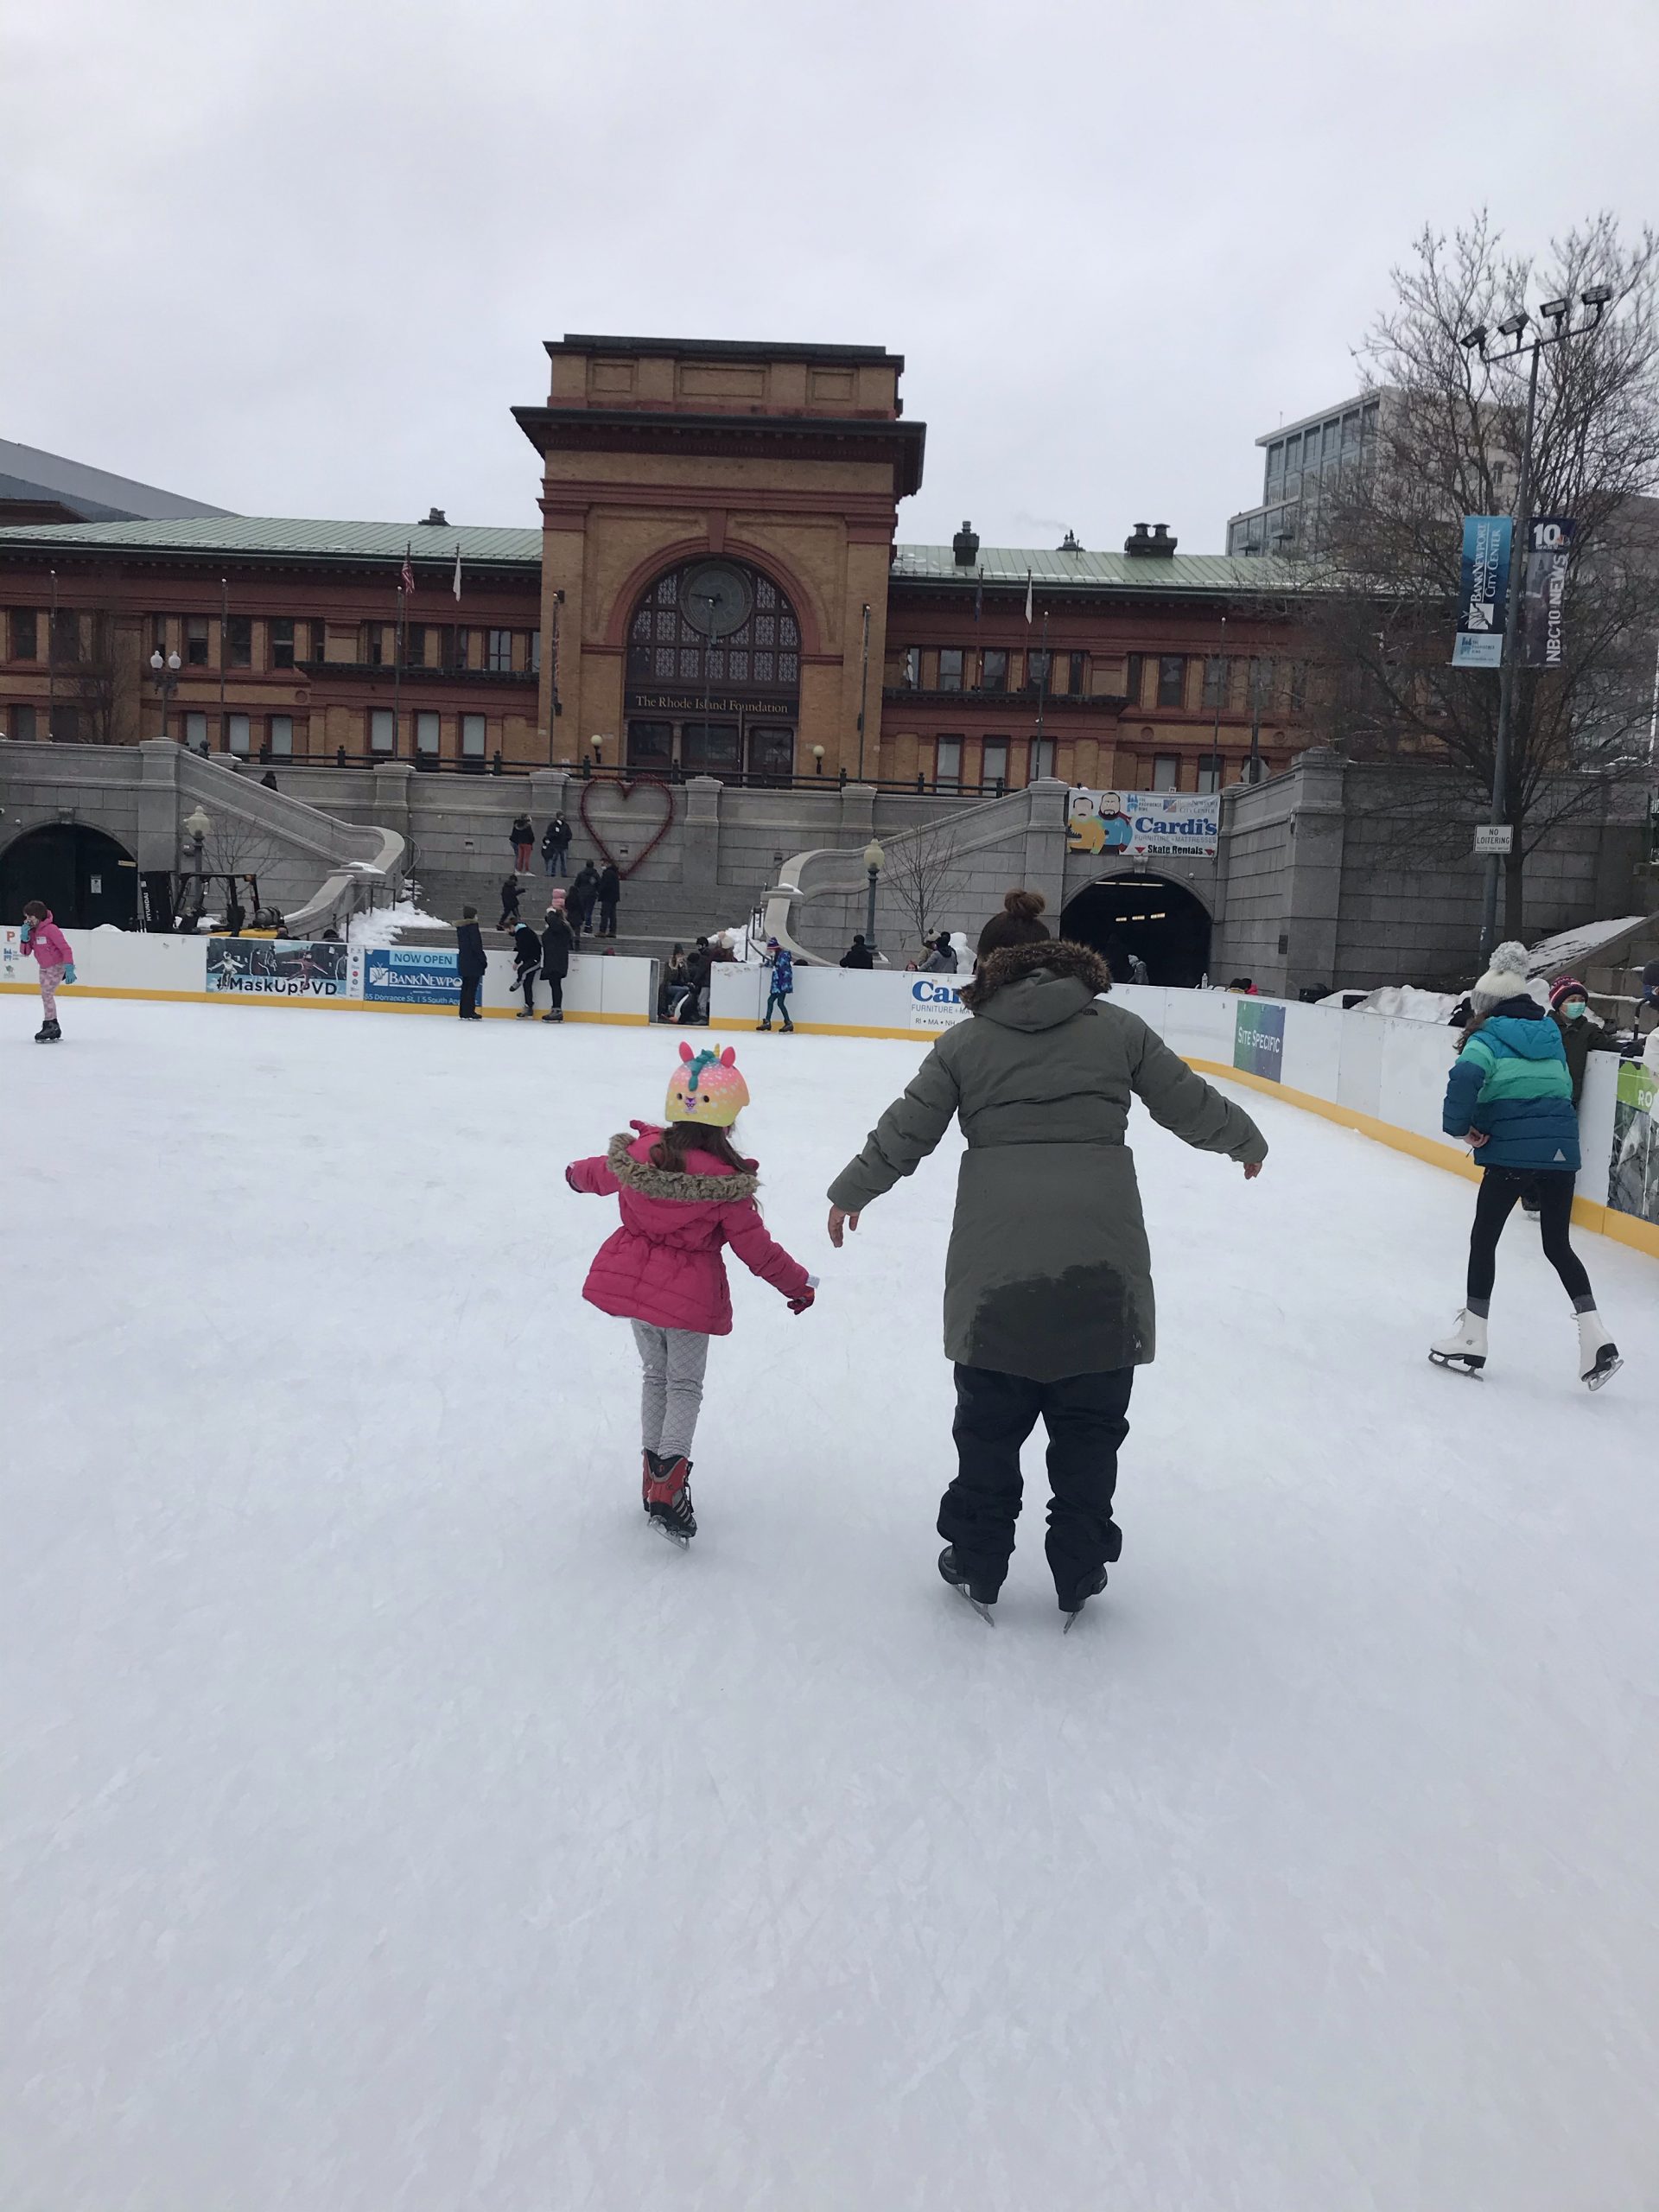 Bank Newport City Center ice rink Providence, Rhode Island with kids